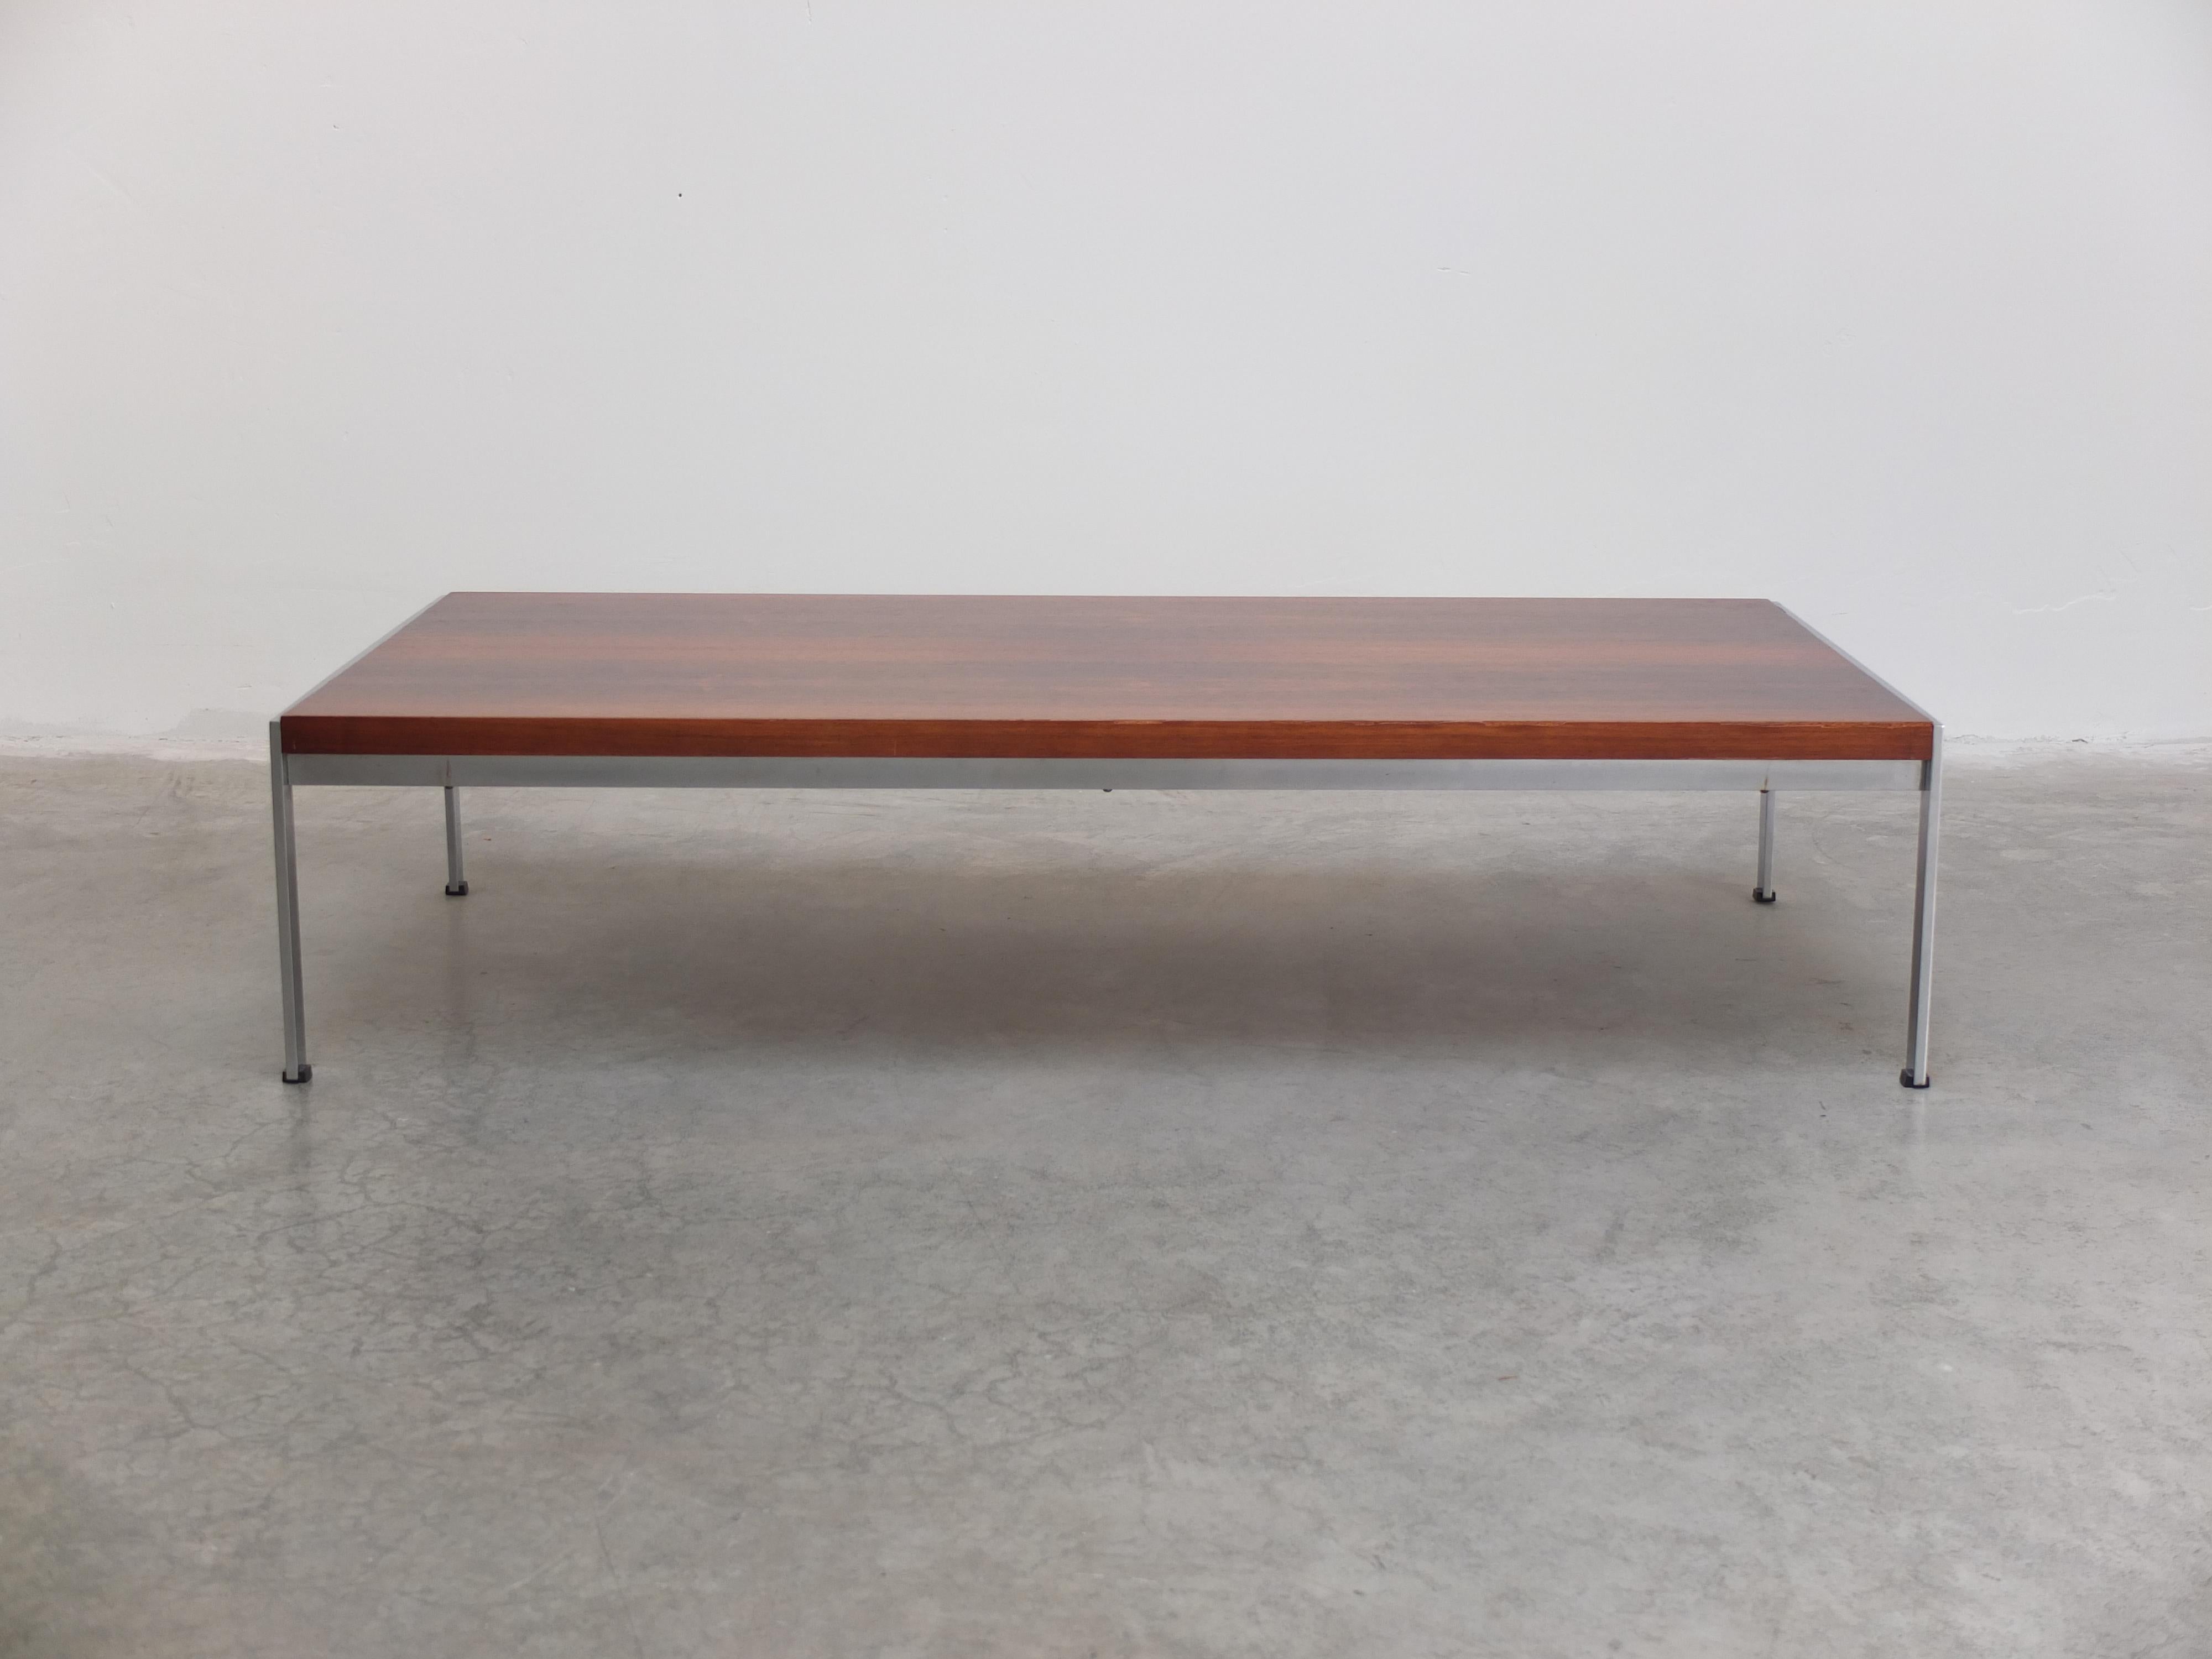 Large coffee table ‘model 867’ from the rare ‘020 series’ designed by Kho Liang Ie for Artifort in 1958. This example has a large rectangular top made of Rosewood with a very decorative woodgrain. The chromed metal base gives this piece a nice